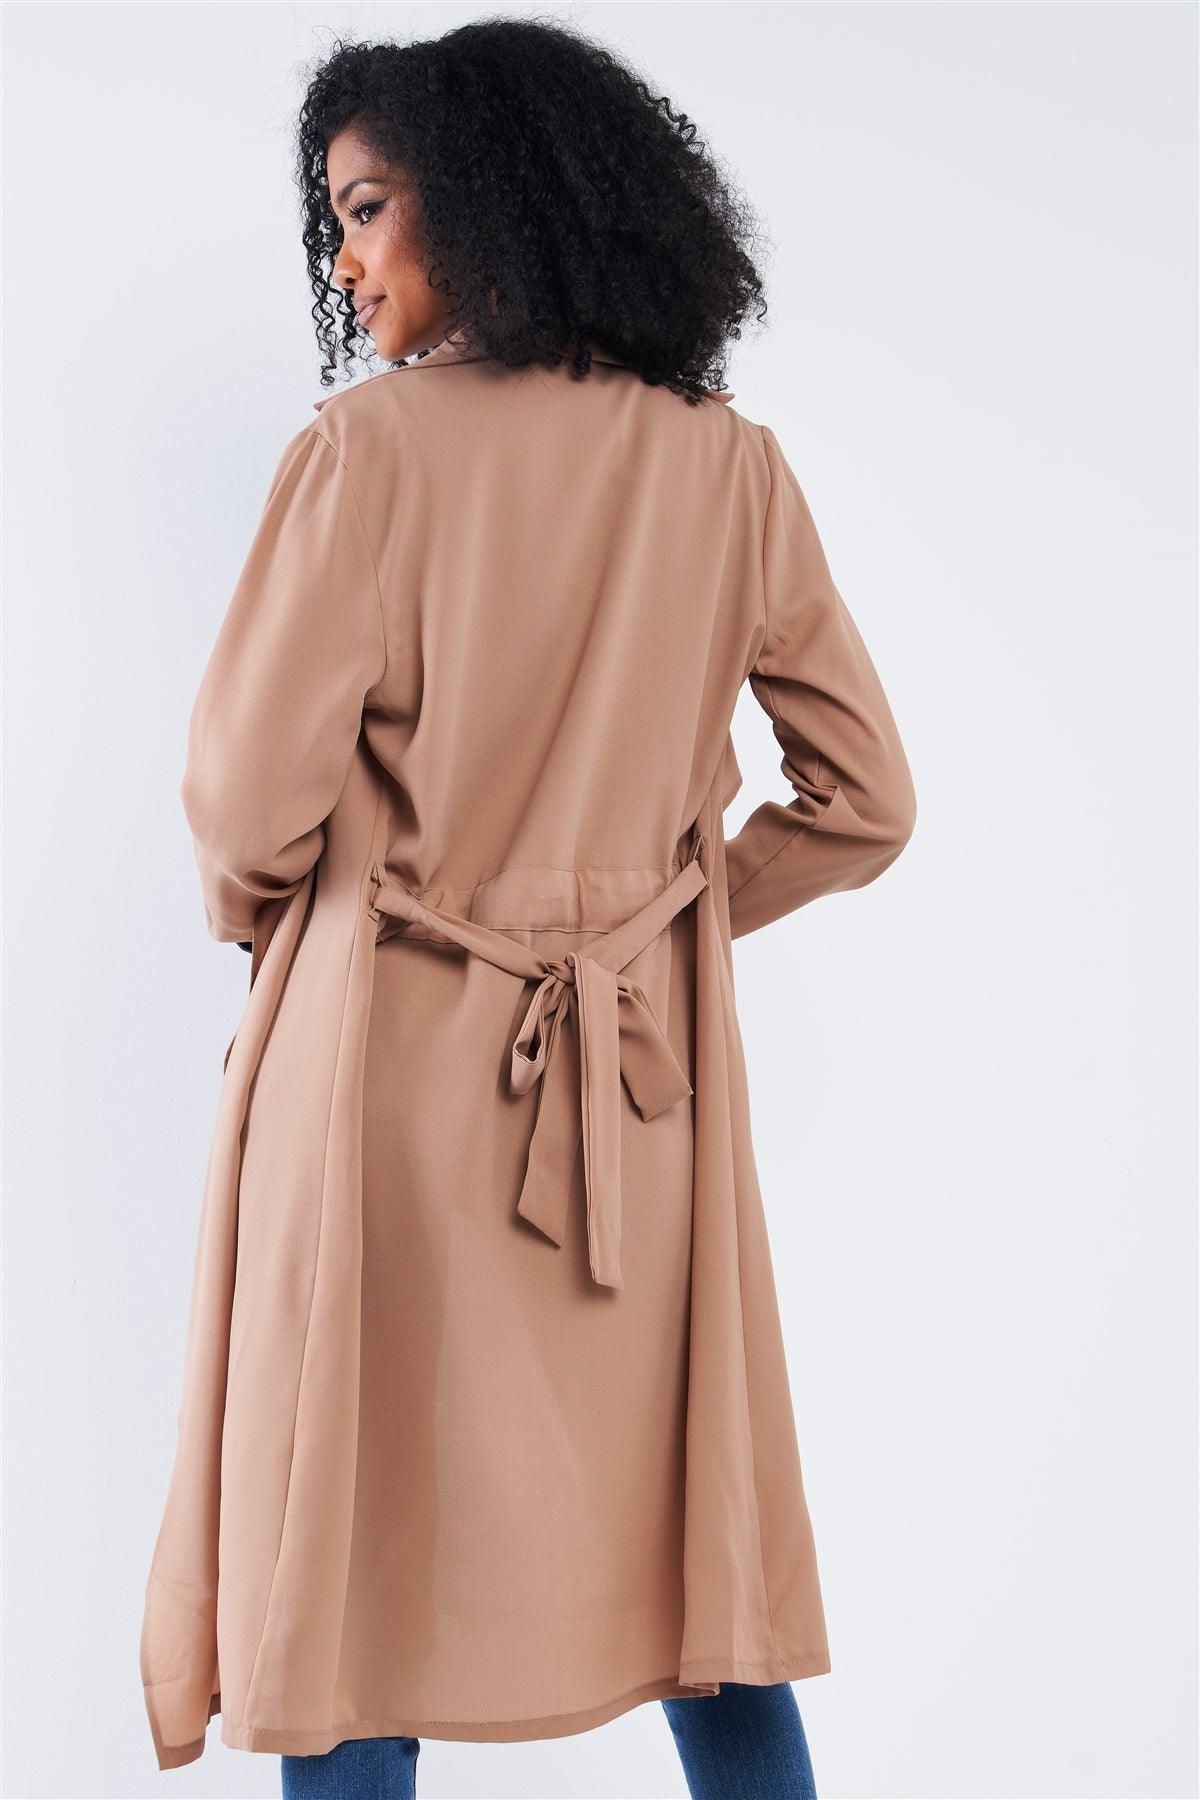 Beige Open Front Self-Tie Long Sleeve Relaxed Fit Lightweight Midi Trench Coat Jacket /2-2-2